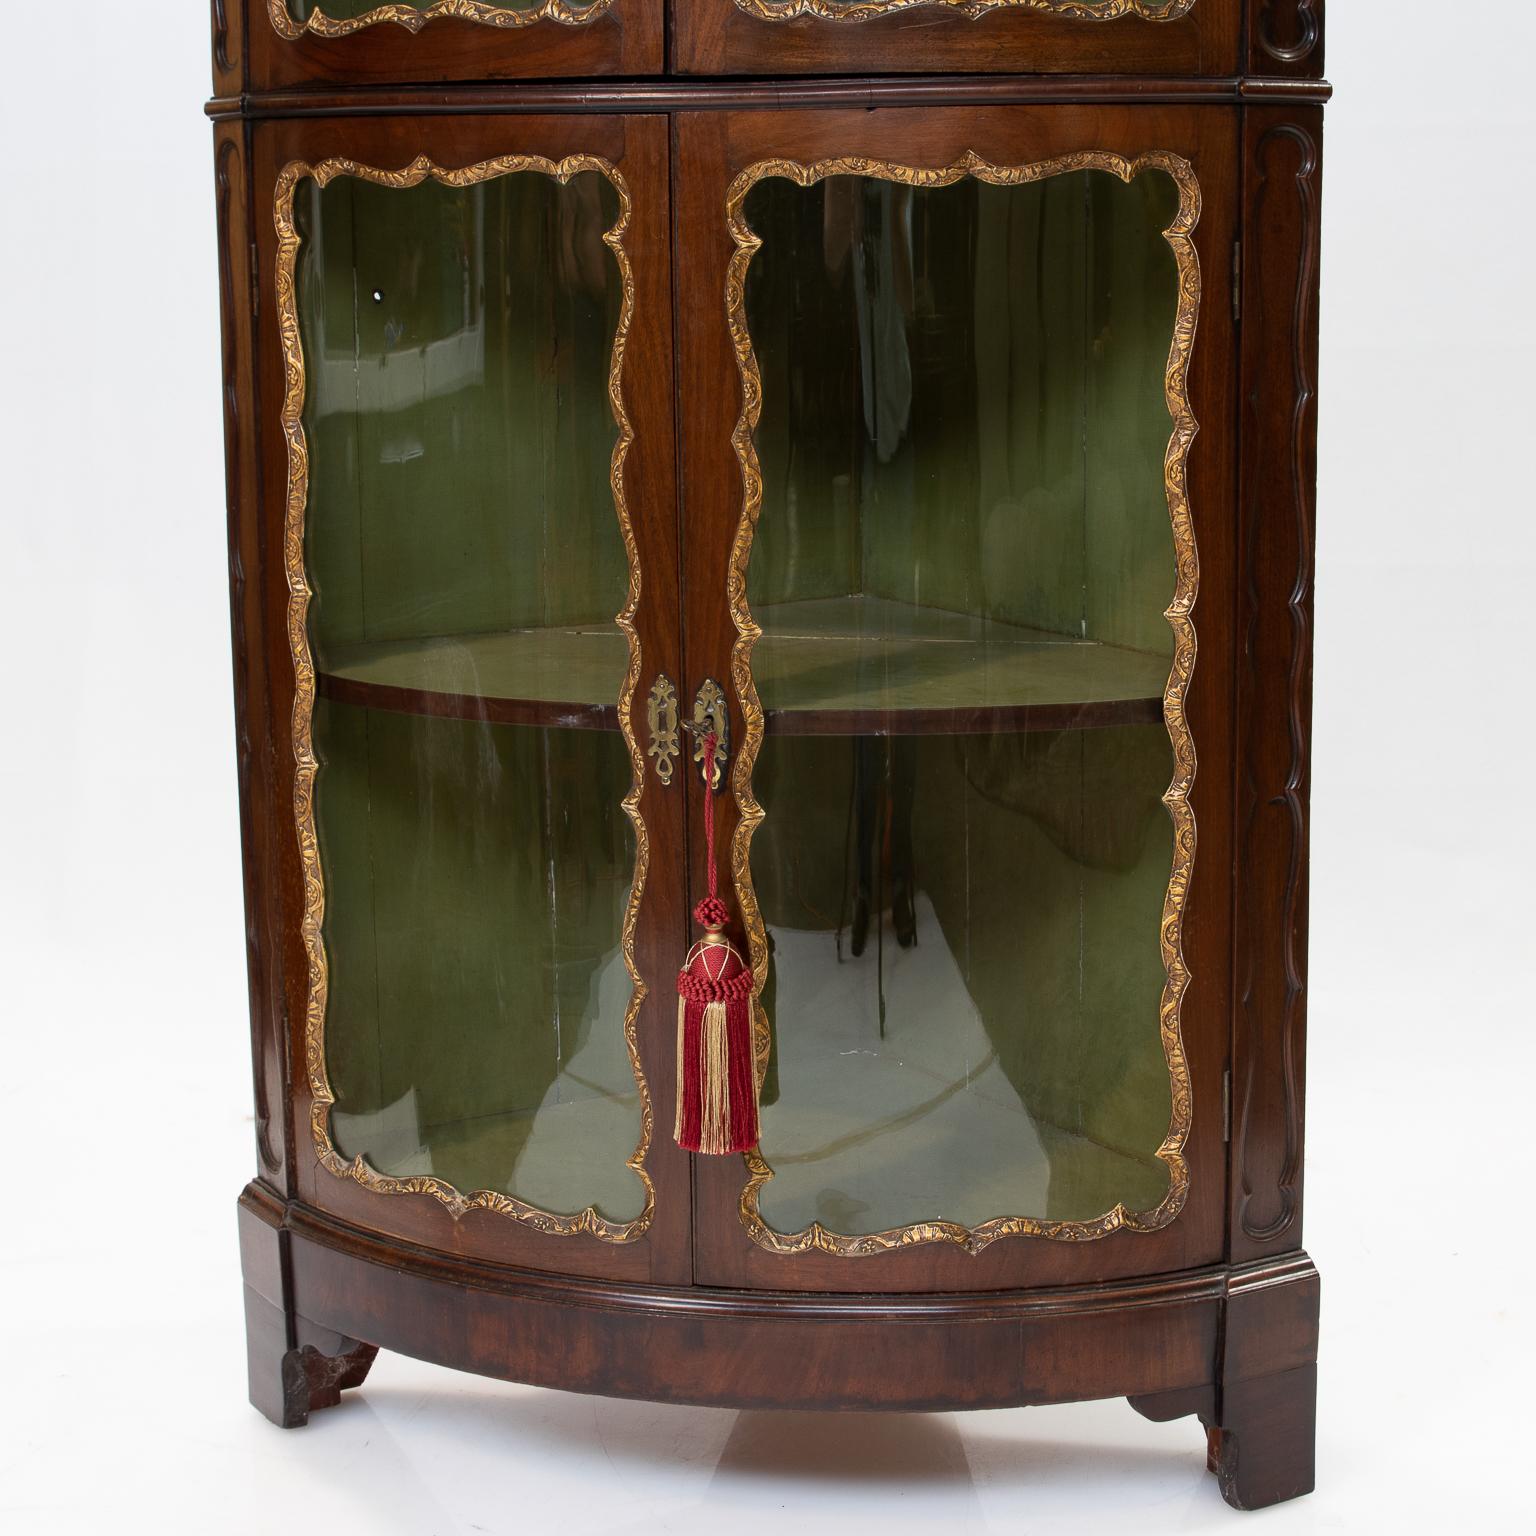 A fine Georgian walnut 19th century. corner cabinet with a bow-front with a glass top and bottom section. Notice the carved moldings surrounding the glass, highlighted in a subtle gold leaf. Very nice quality. Measures: The depth from side to back